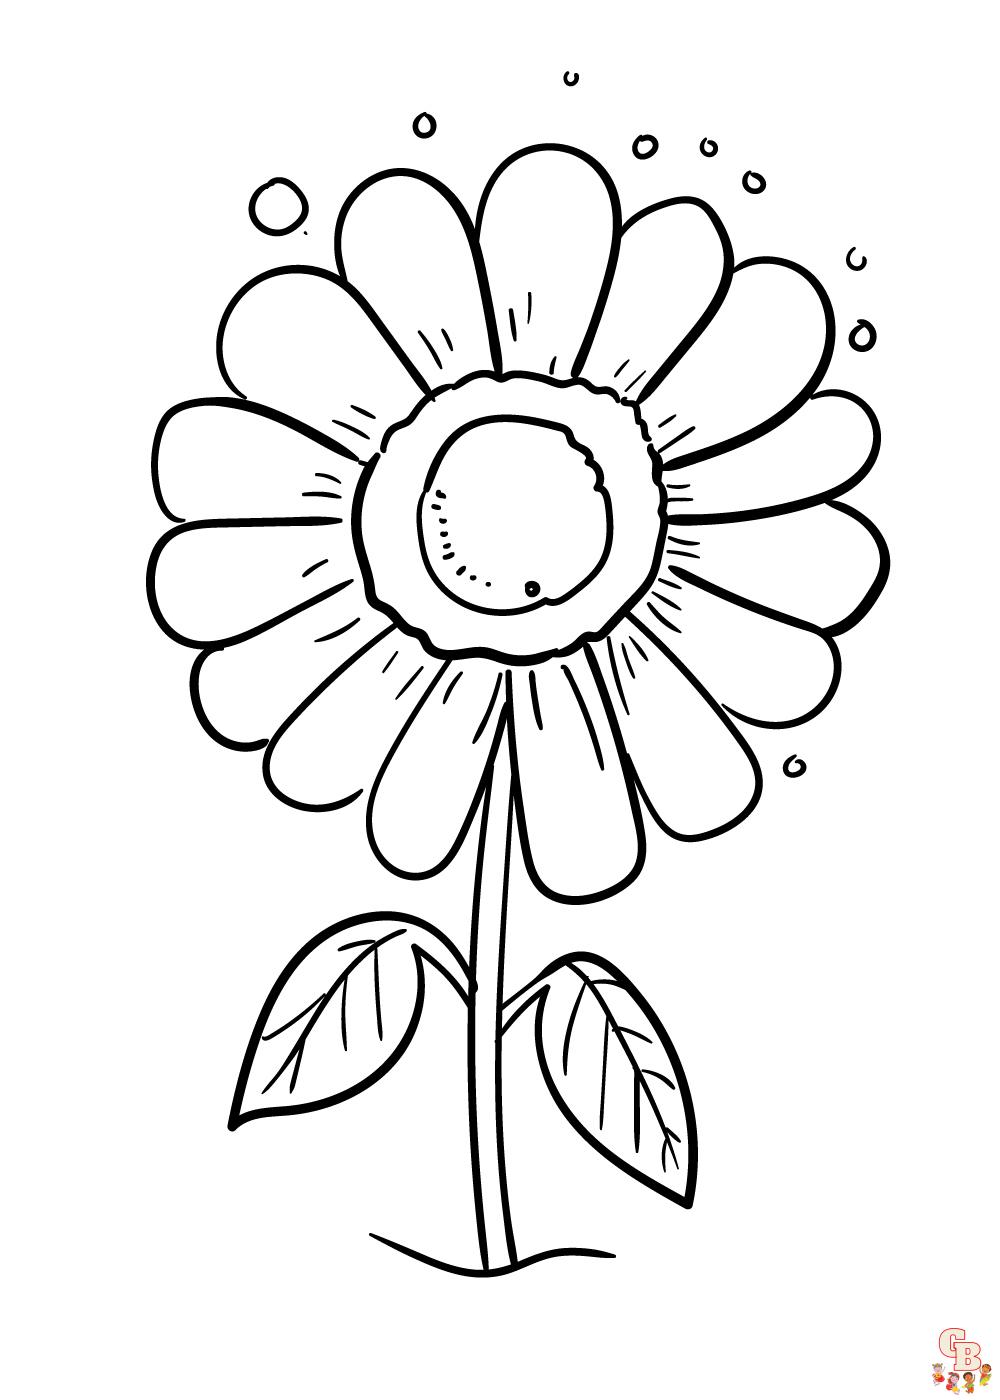 Daisy Coloring Pages 10